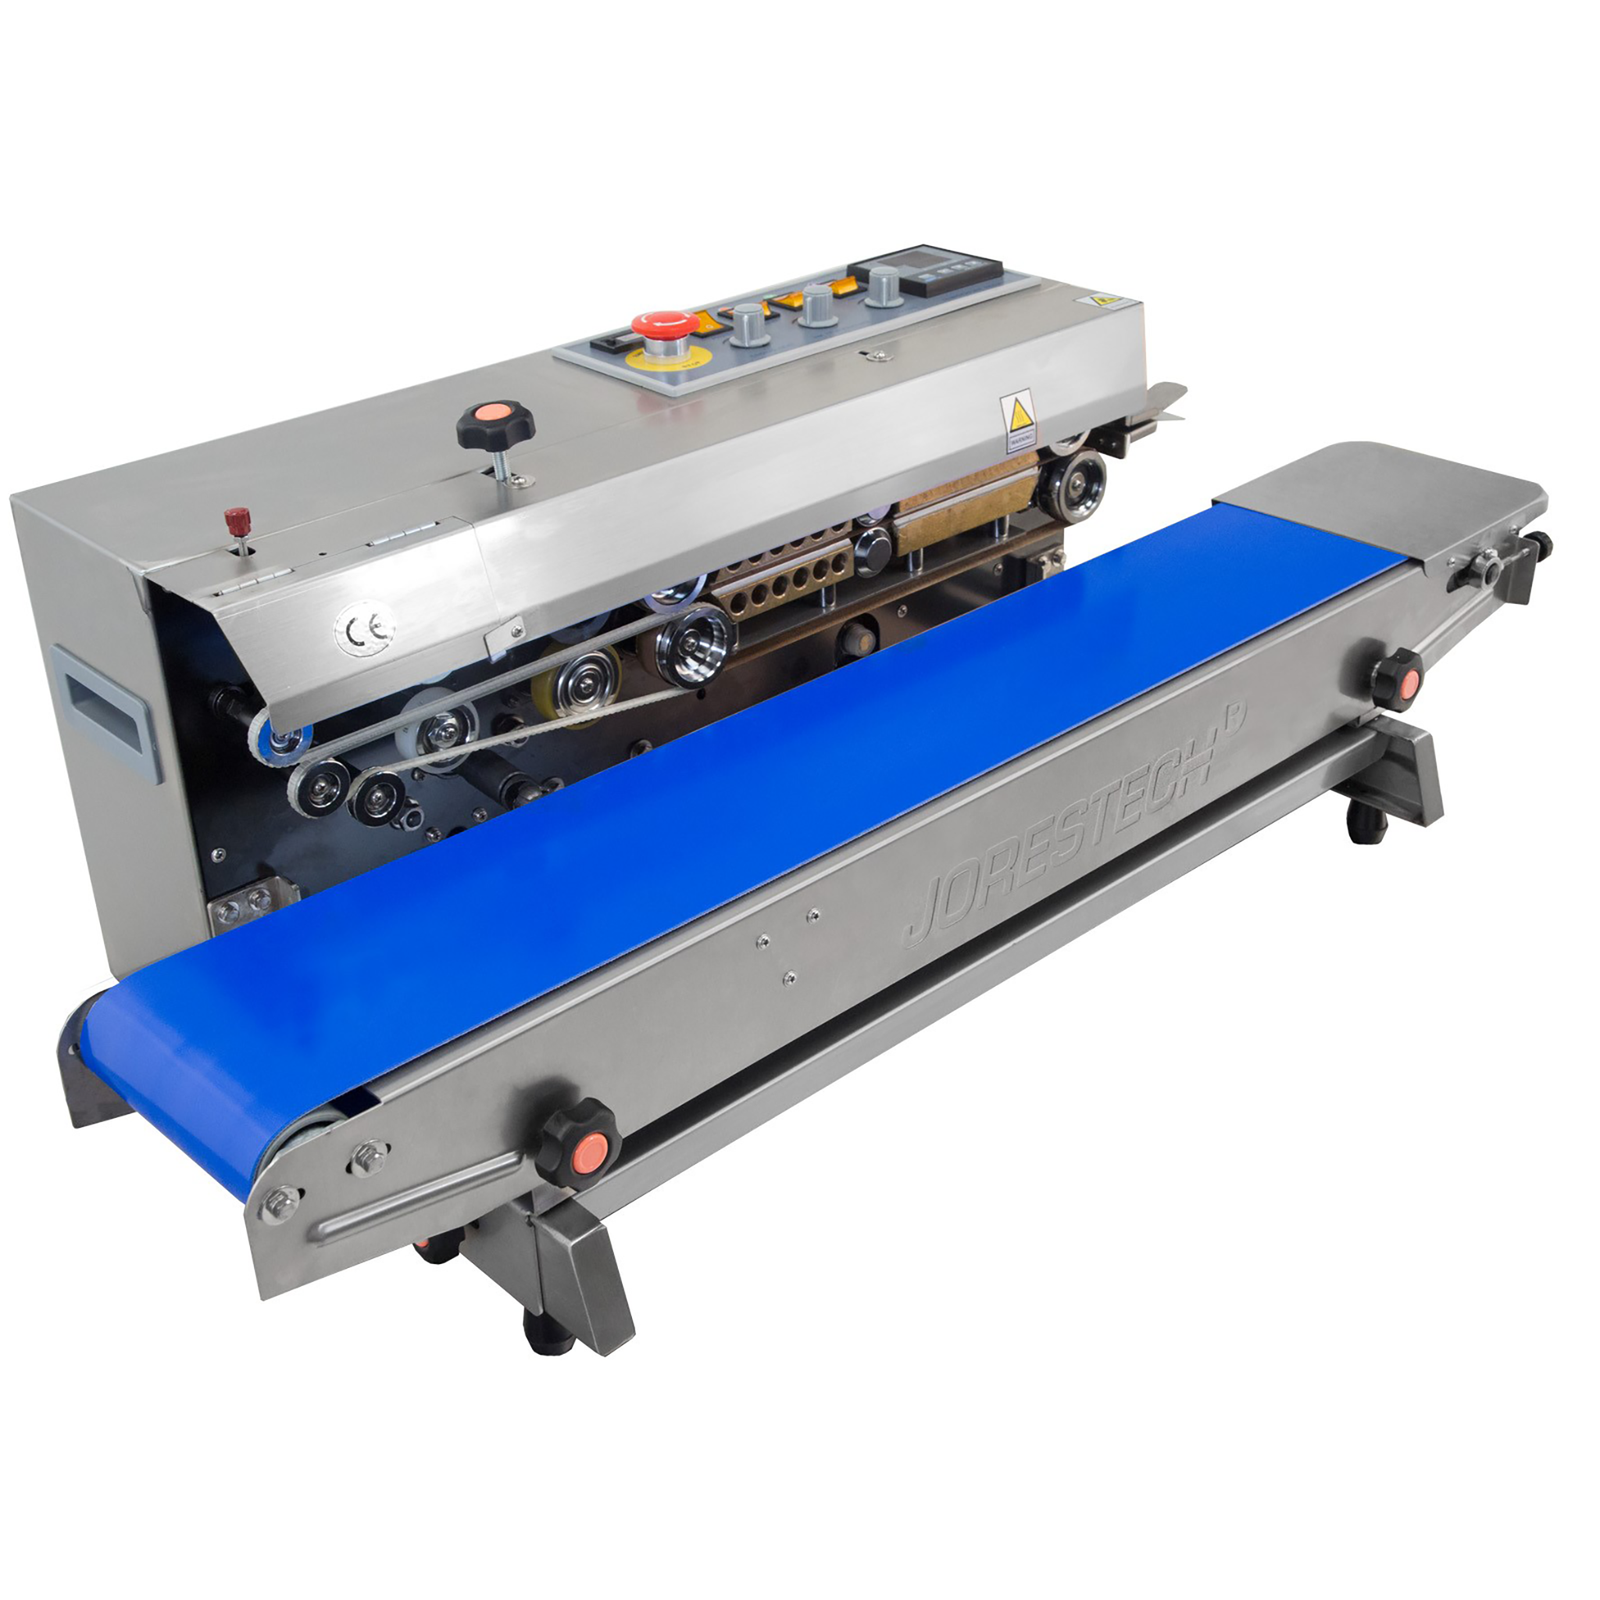 side view of the JORESTECH stainless steel continuous band sealer set in an horizontal position